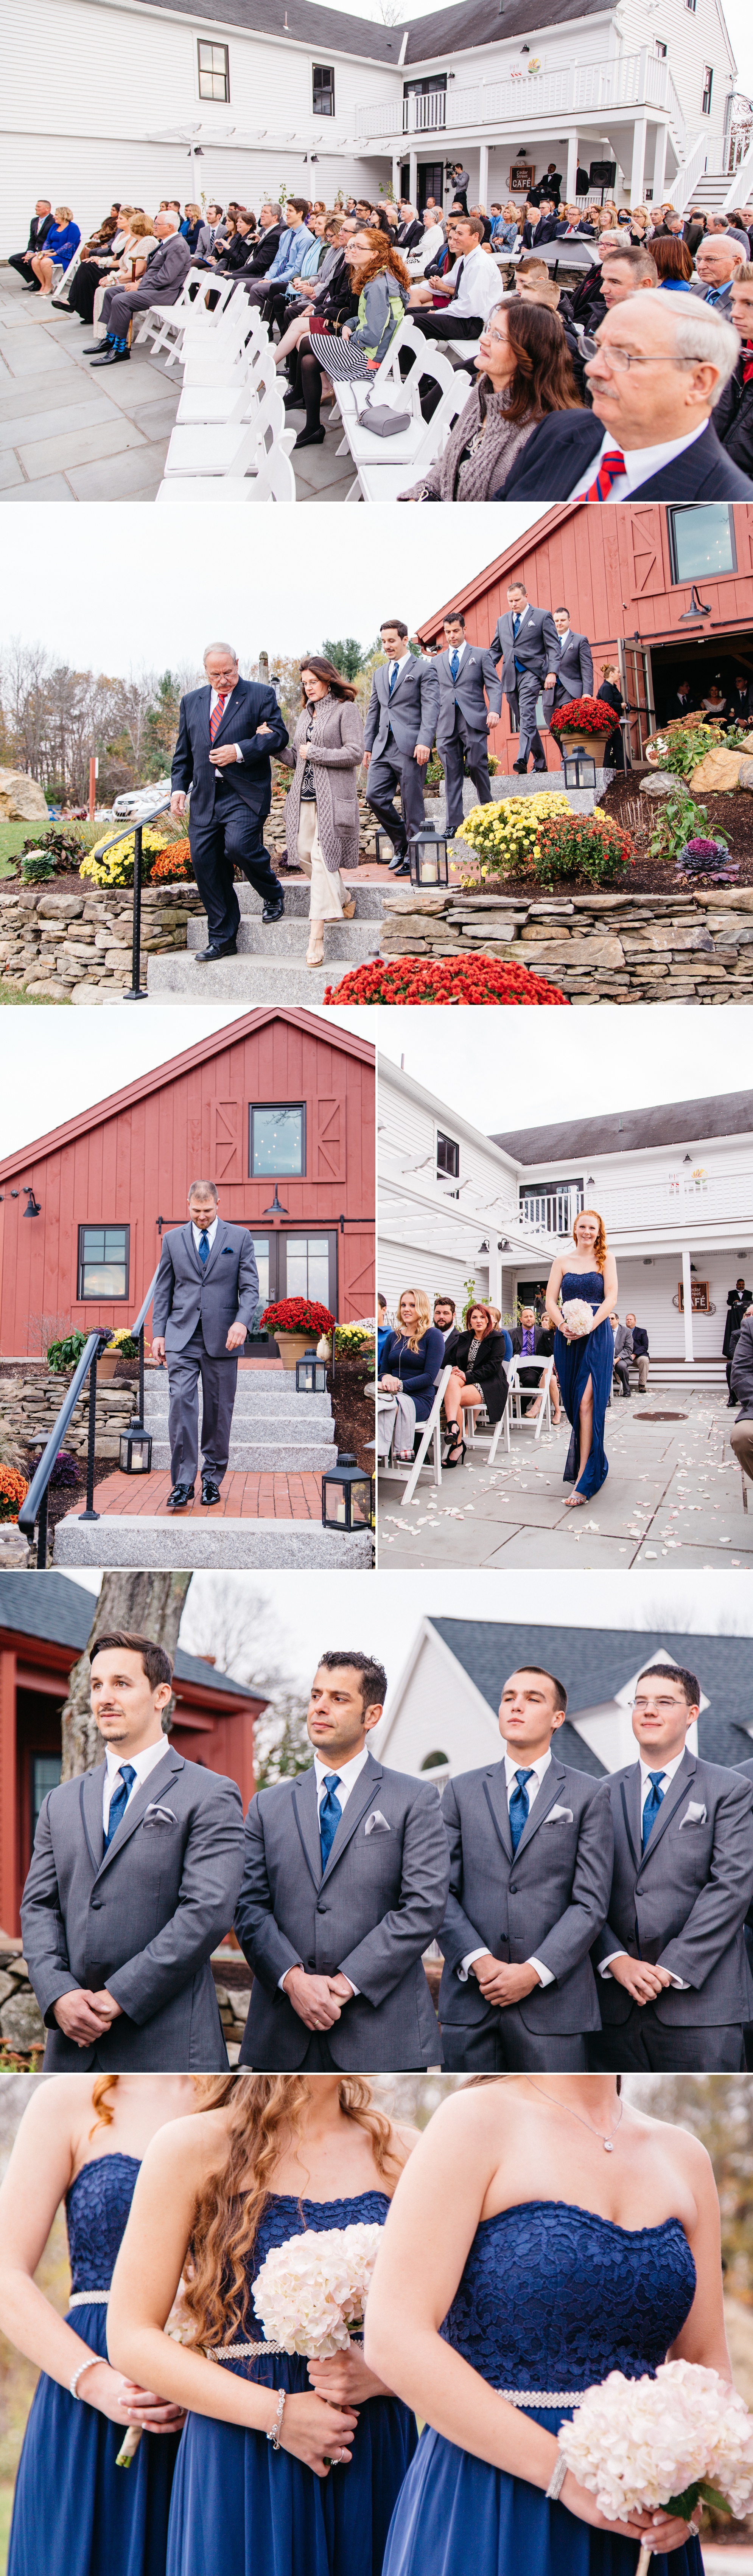 photo collage of ceremony at nichole and george's classic wedding at the wight barn in sturbridge massachusetts